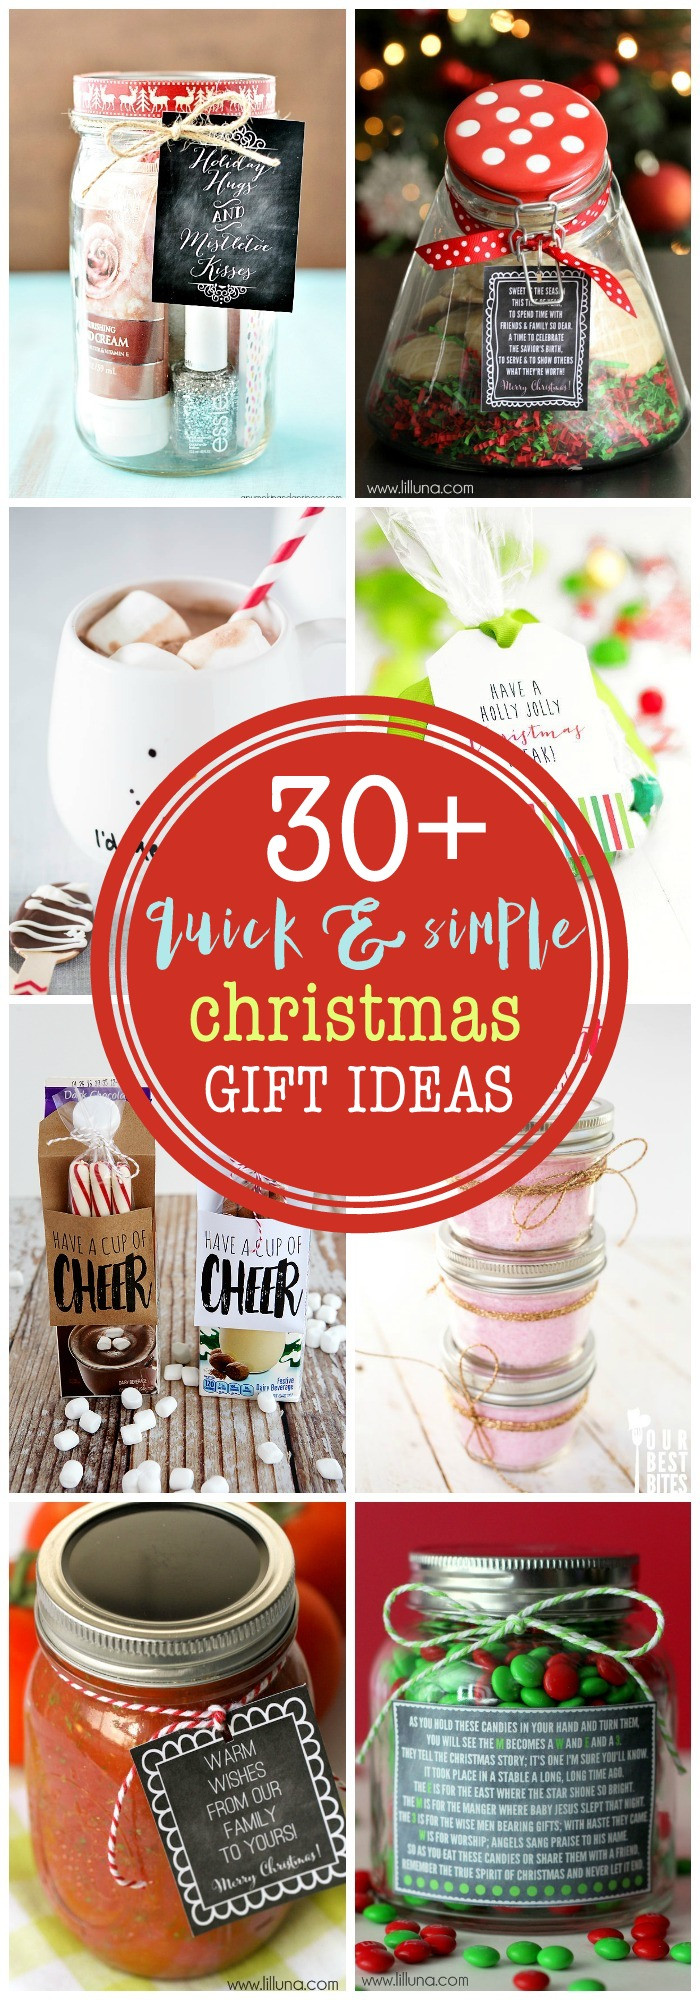 Simple Christmas Gift Ideas
 Quick and Simple Christmas Gifts